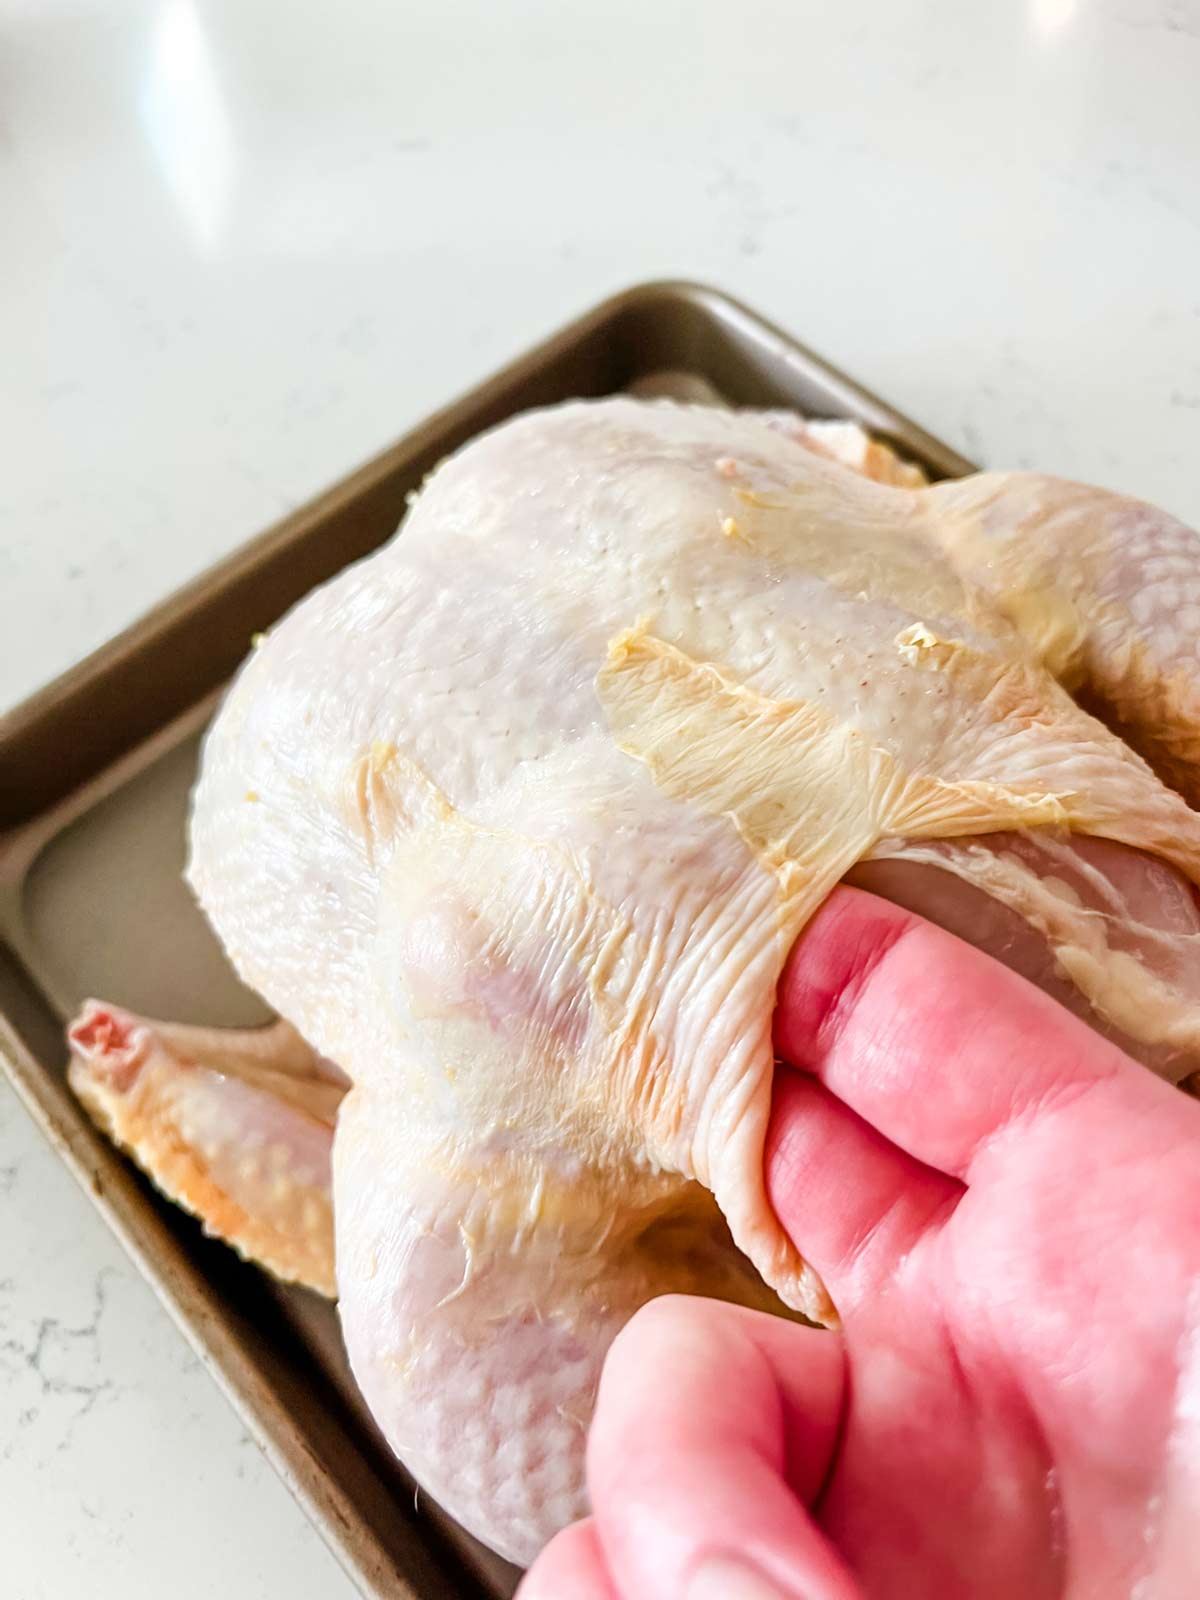 Lifting up the skin from a whole chicken.